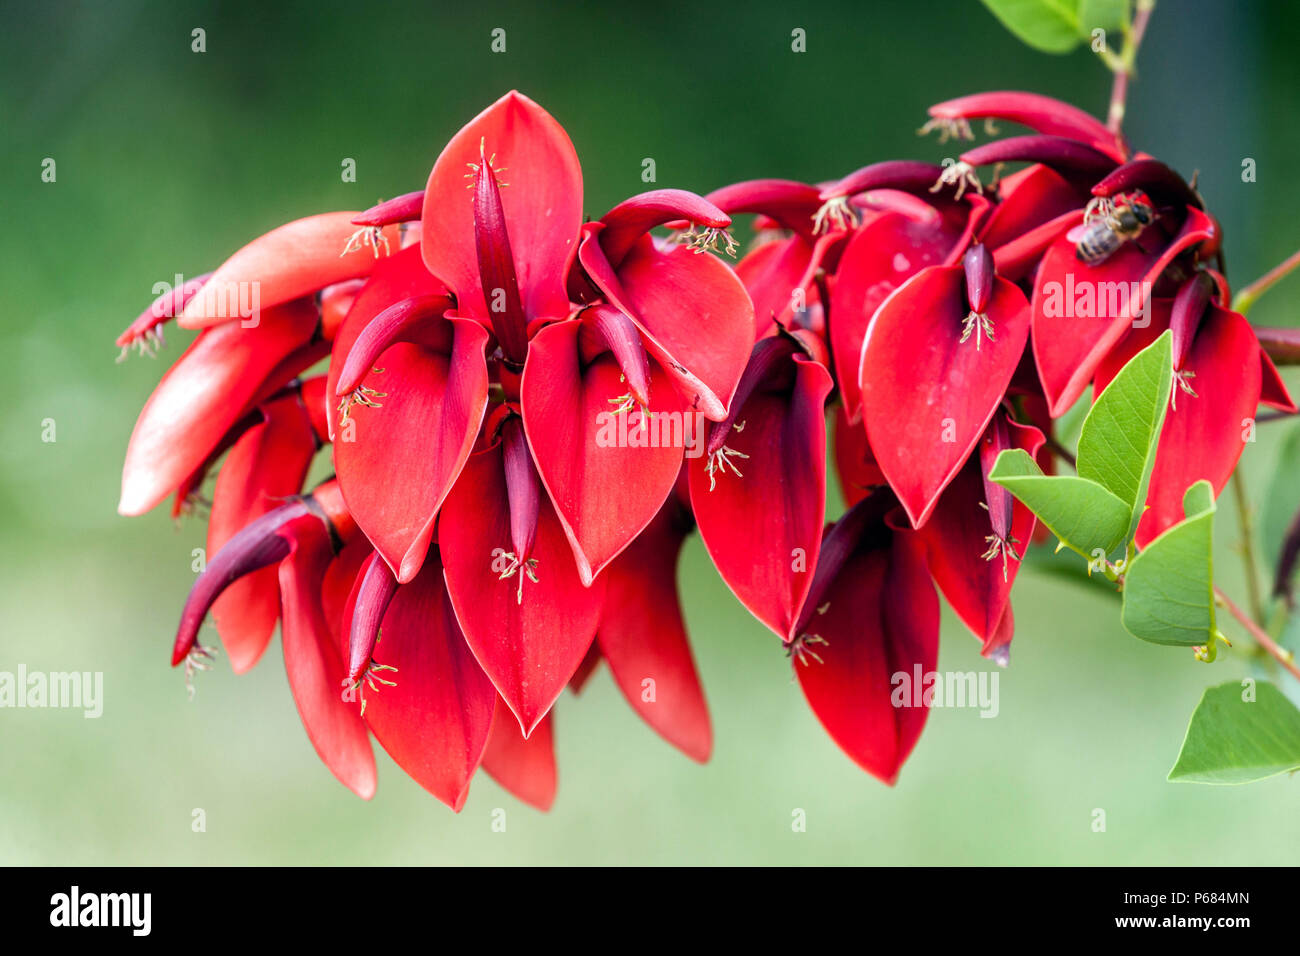 Cockspur coral tree, crying baby, Erythrina crista-gallii, tree red flower Stock Photo